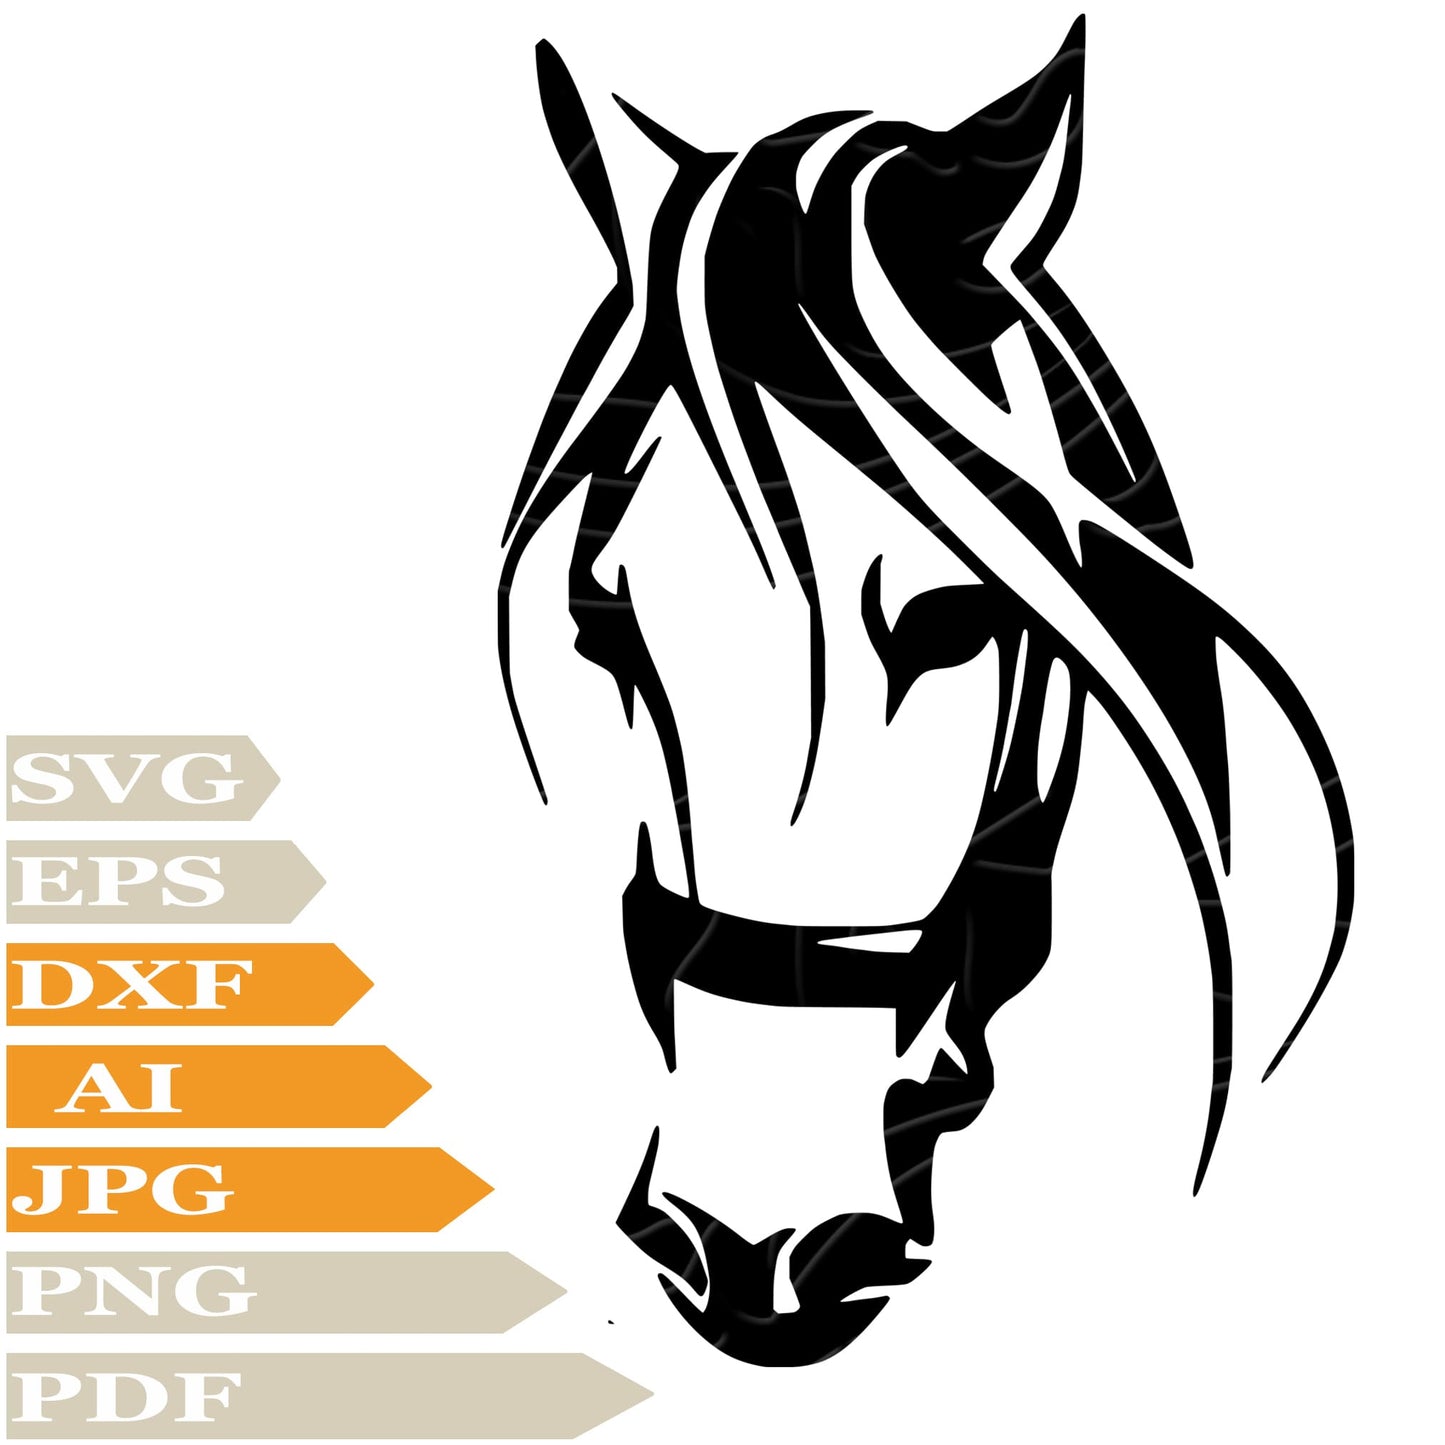 Sofvintage-Horse Svg File,Horse Head Svg Design,Wild Animals Svg,Horse Png,Horse Head Vector Graphics,For Cricut,Clipart,Image Cut,T-Shirt,Wall Sticker,For Tattoo,Silhouette